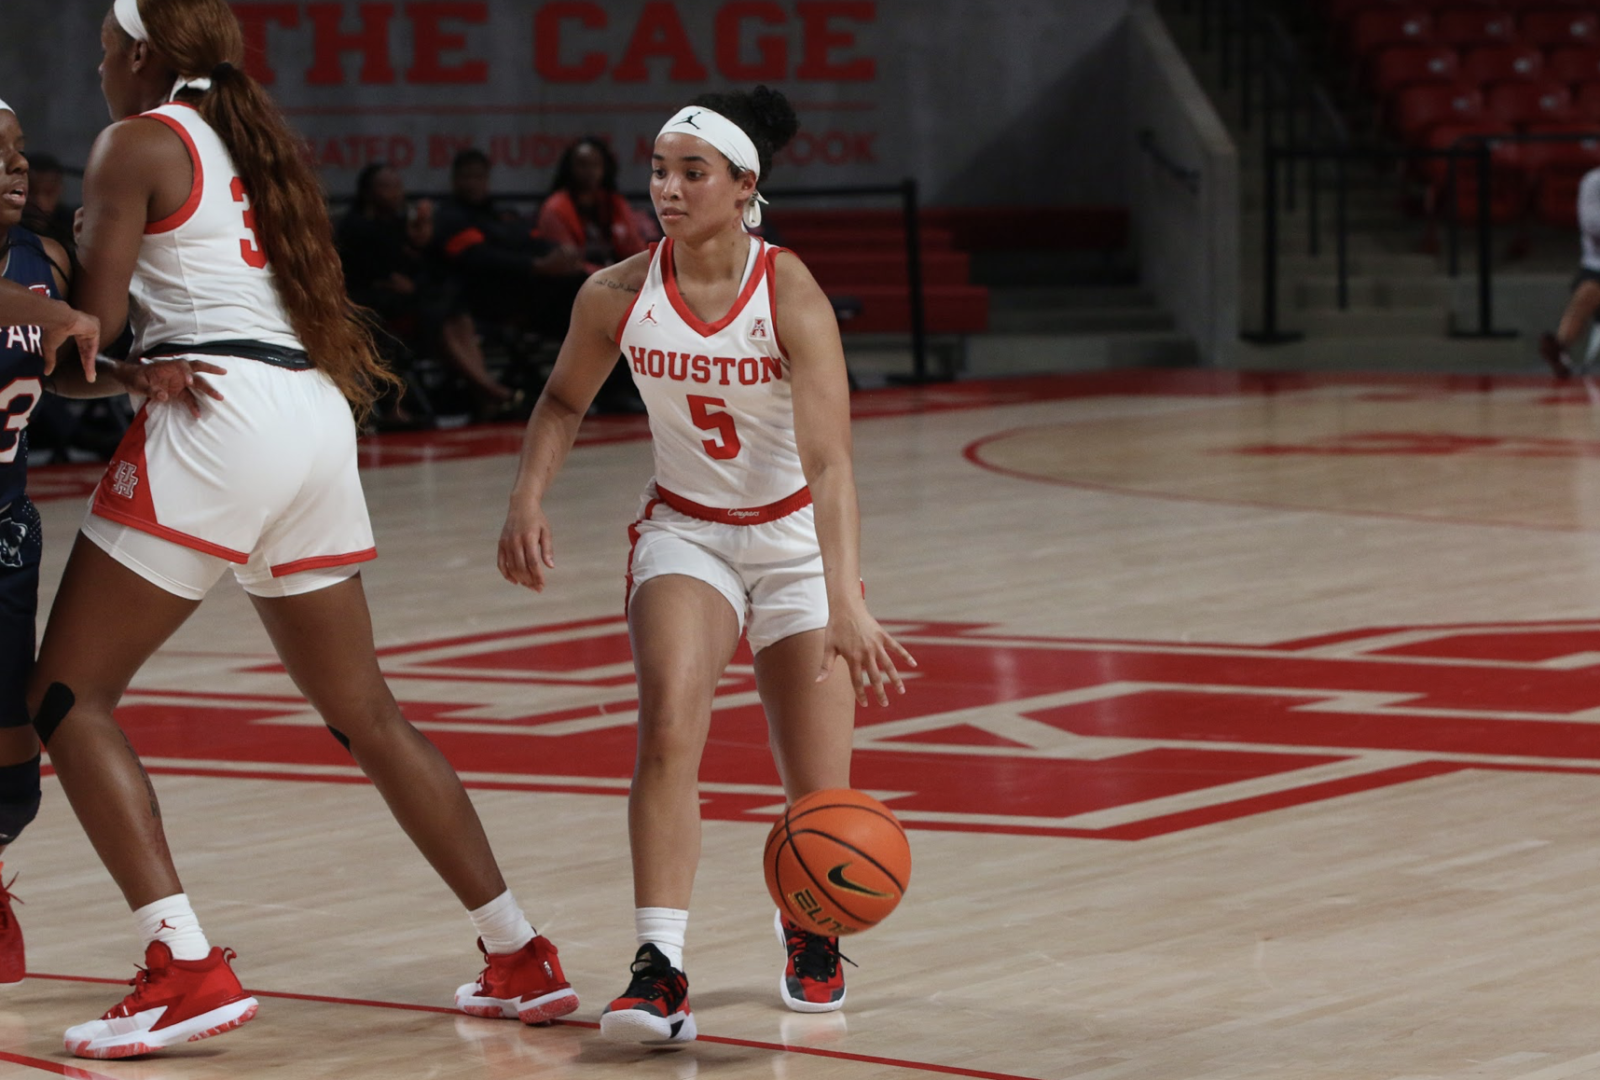 UH women's basketball improved to 5-5 with its win over Louisiana on Sunday afternoon at Fertitta Center. | DeAundre Billingsley/The Cougar